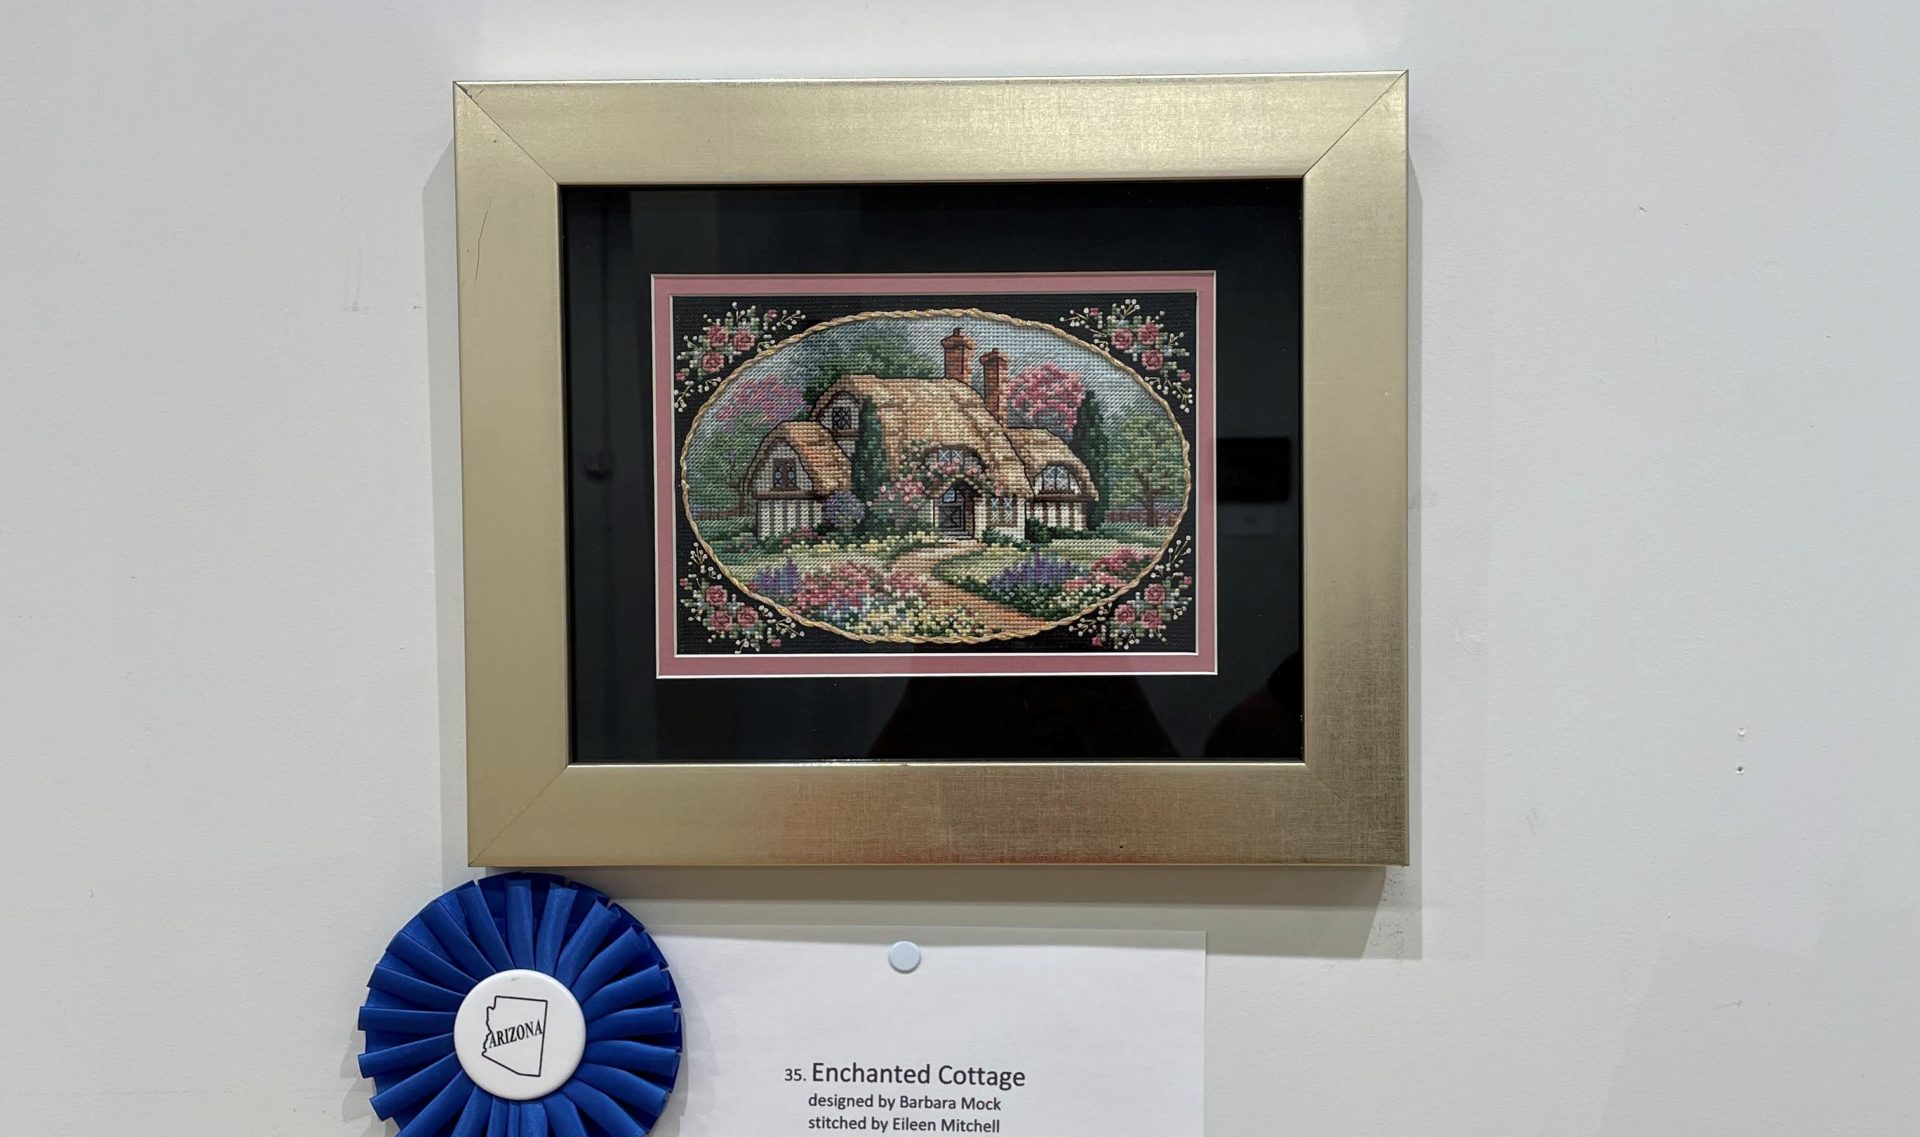 The Starlight Stitchers Chapter showcases beautiful embroidery at their Arizona Needle Arts Exhibit